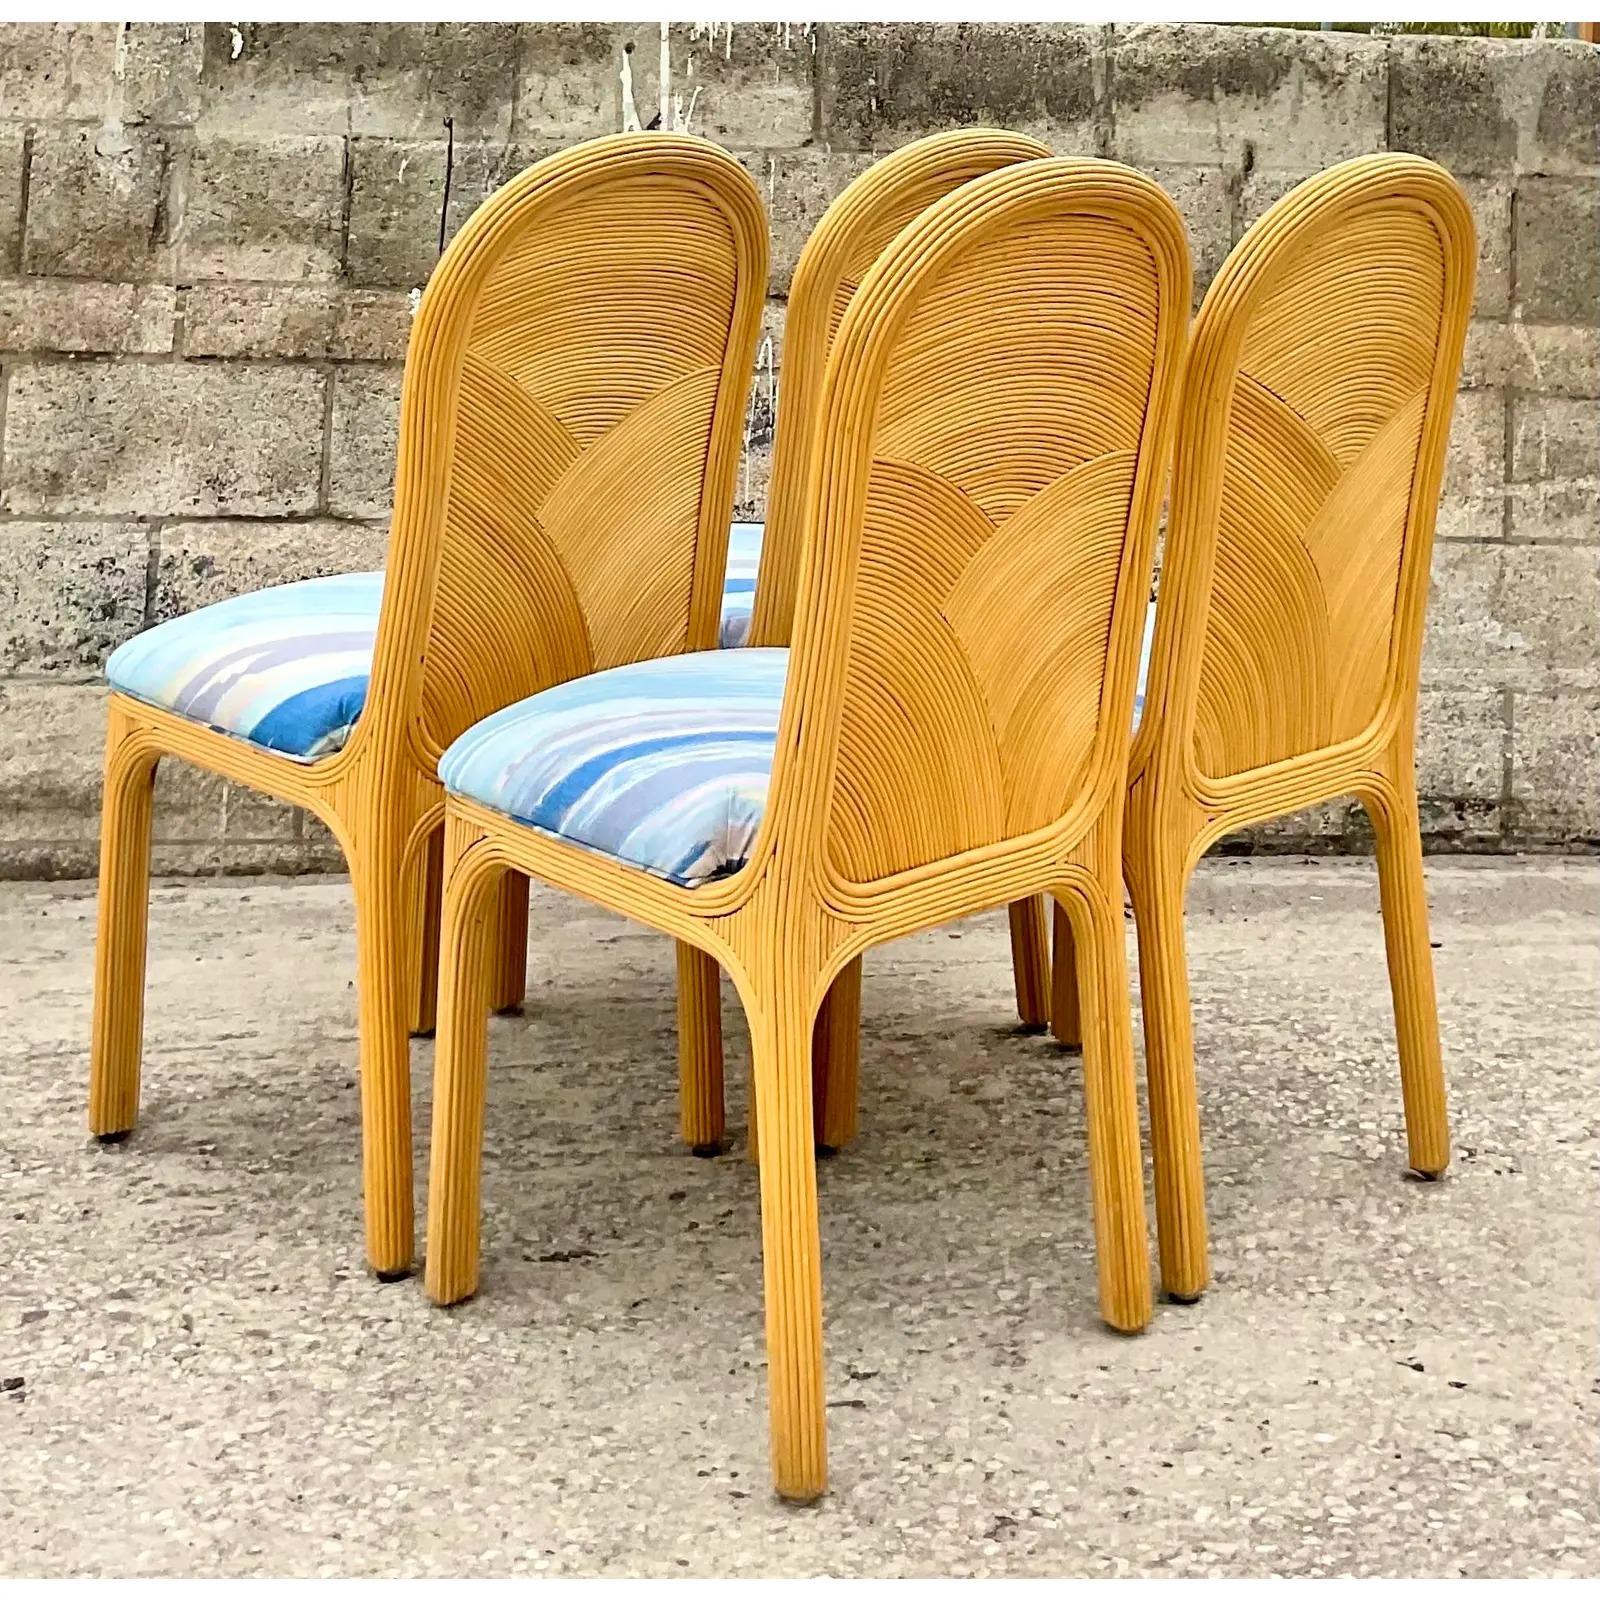 Fantastic set of four vintage dining chairs. Chic arched design in a fab vintage print. Acquired from a Palm Beach estate.